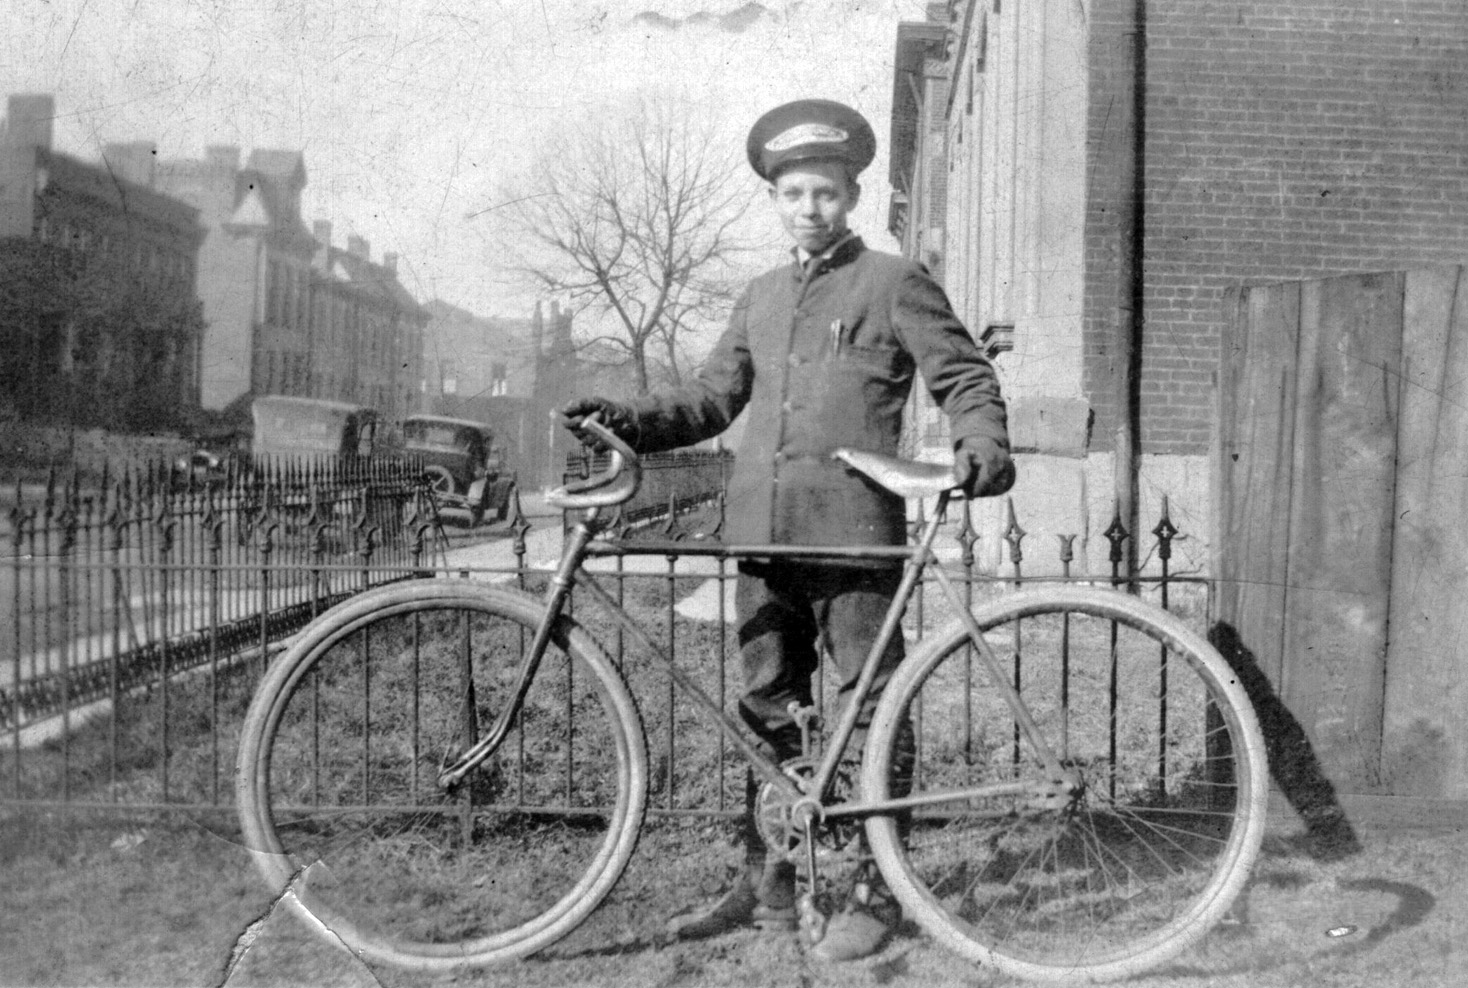 This was my grandfather as he was heading out for the tougher streets of St. Louis to deliver messages of joy and sorrow for the Speedy Courier Service, circa 1925. View full size.